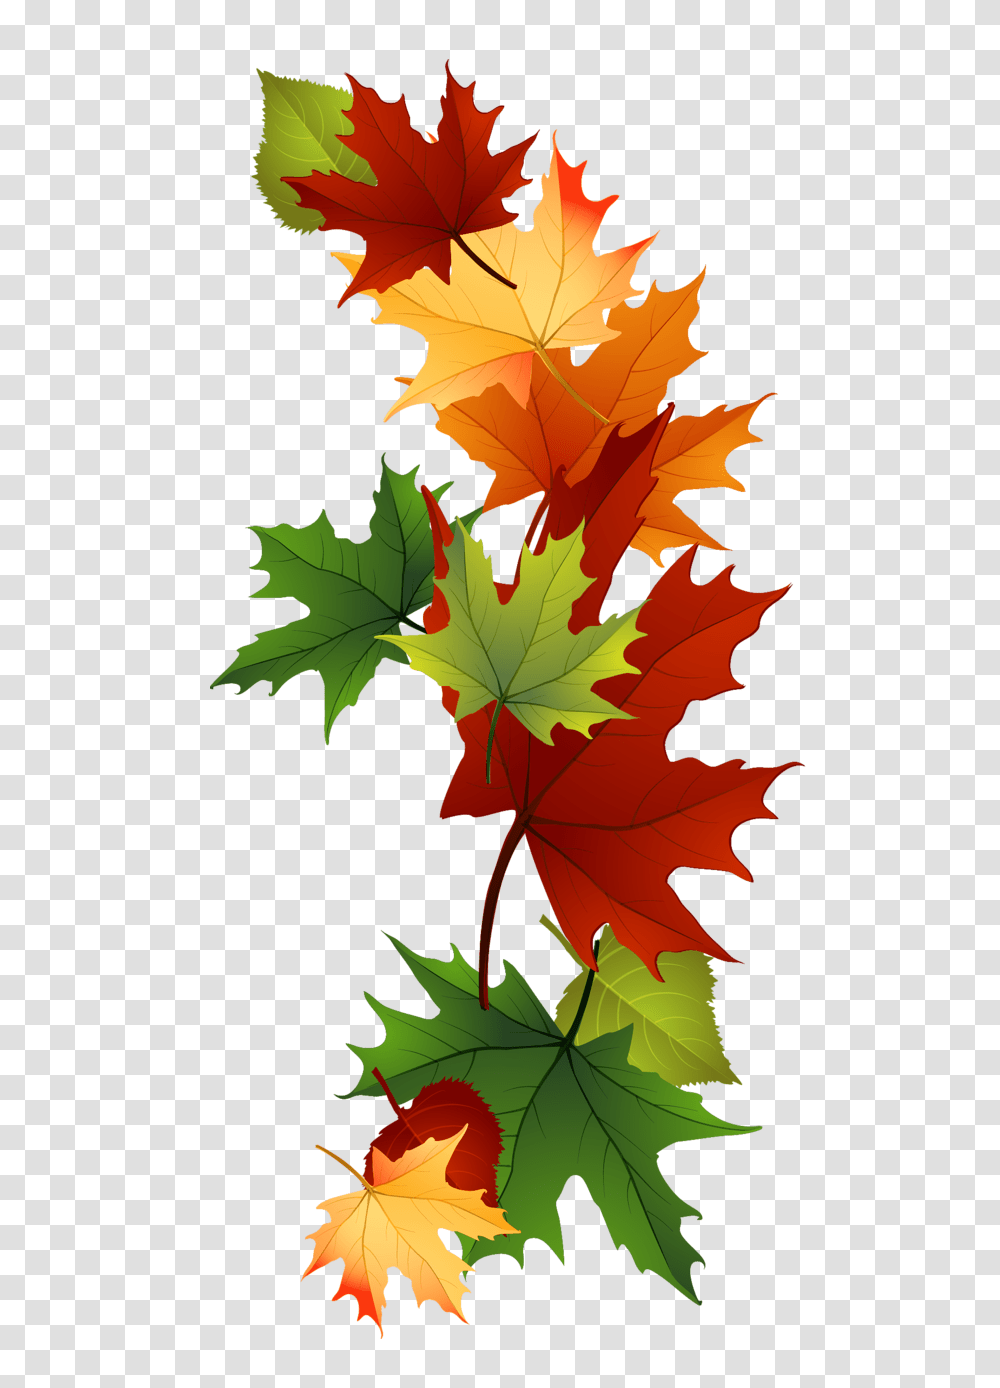 Leaf Fall Leaves Clip Art Beautiful Autumn Clipart Image Gifts, Plant, Tree, Maple, Maple Leaf Transparent Png